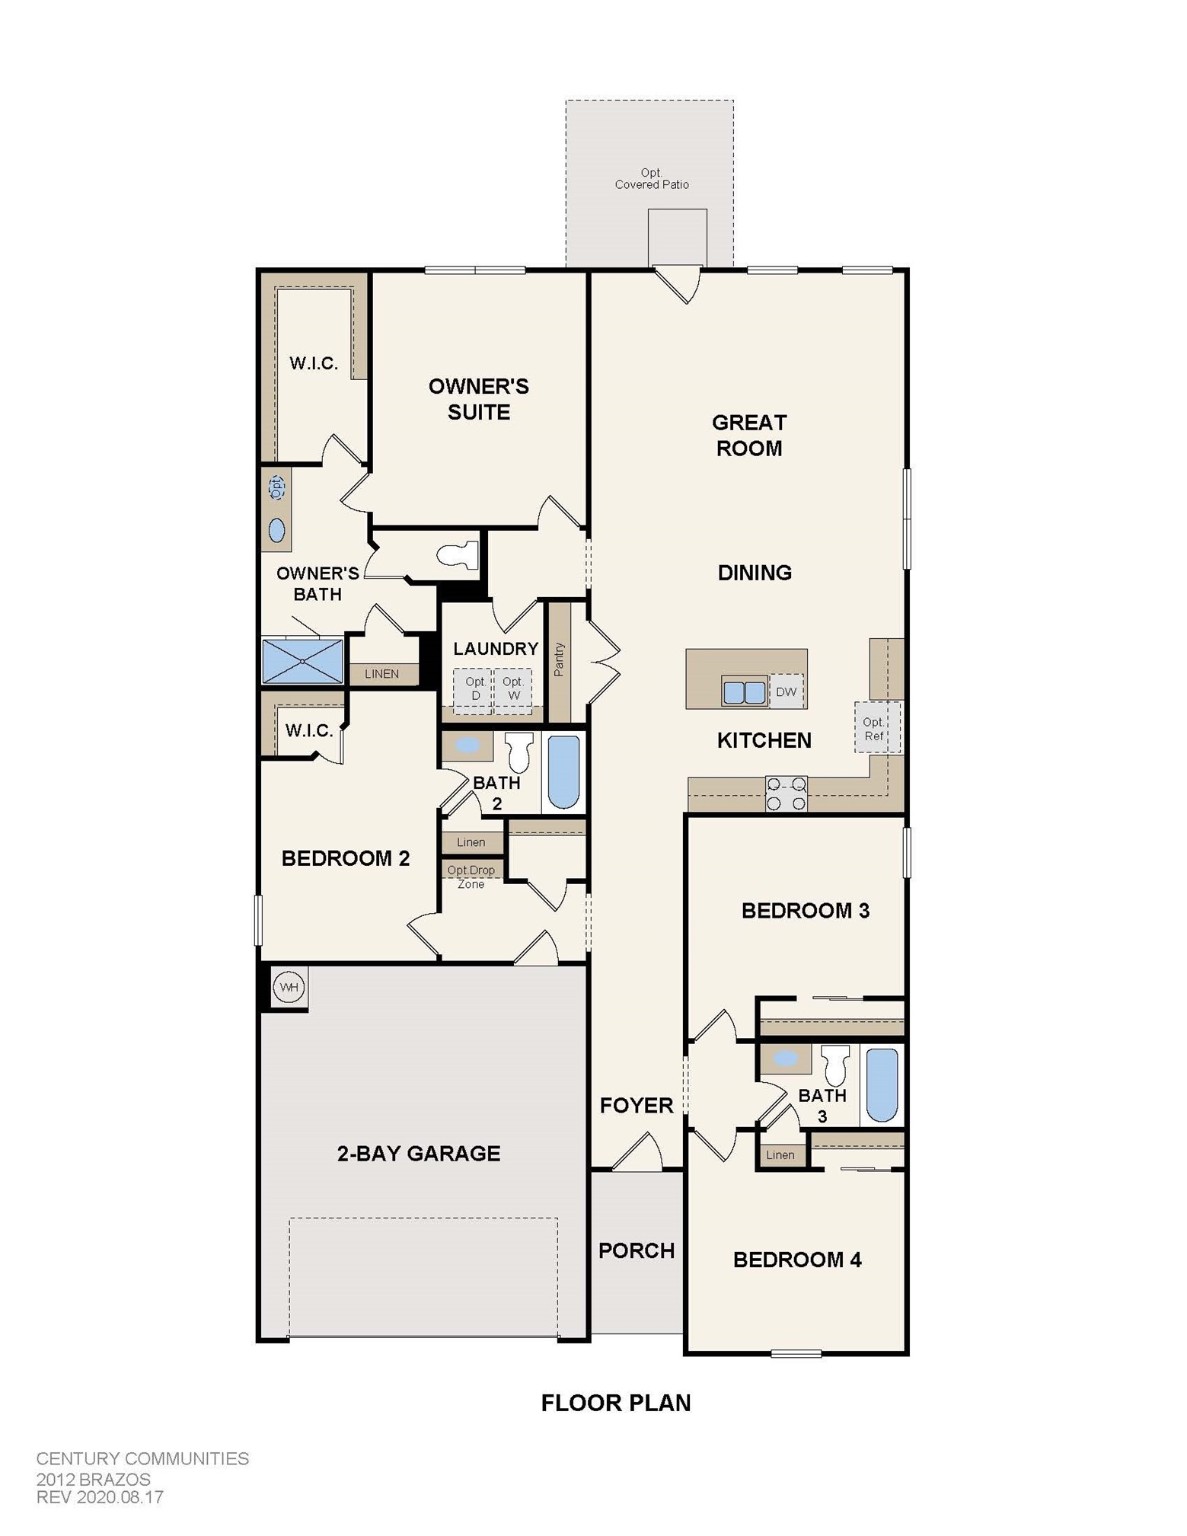 The 1-story 2012 floorplan features 4 bedrooms, 3 full baths and an attached 2 car garage.